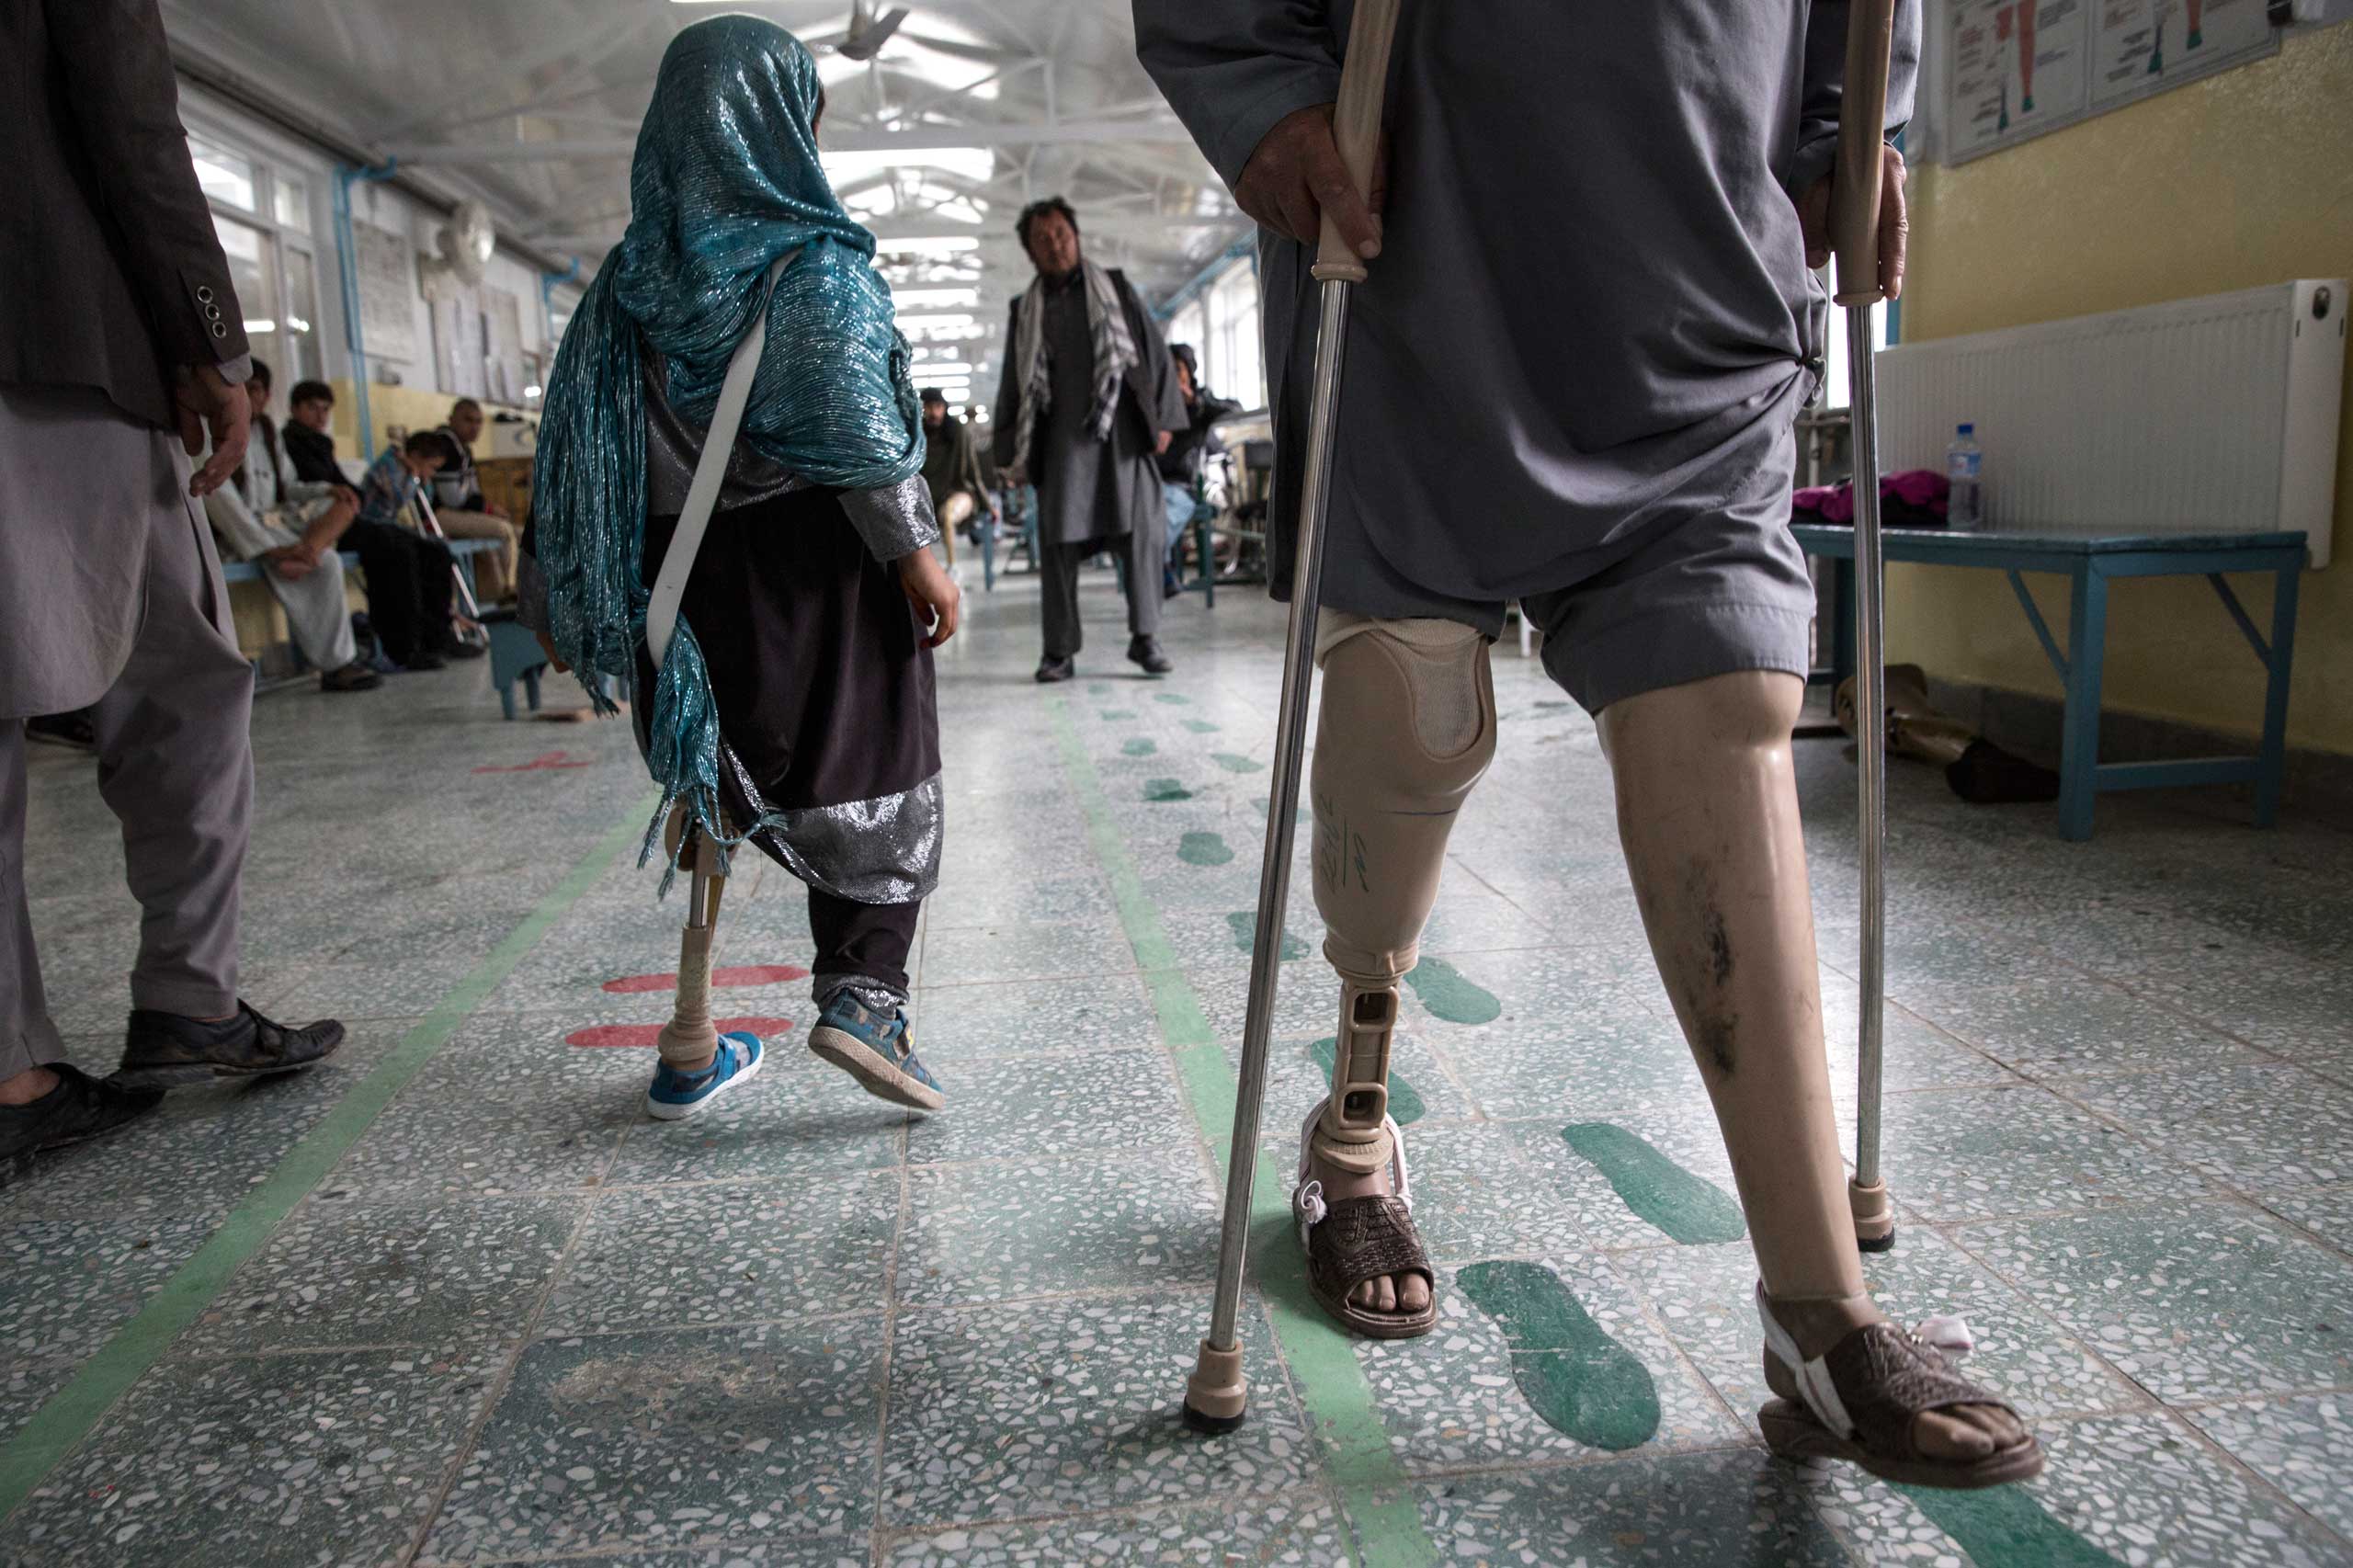 At the ICRC Orthopedic center, handicapped patients practice walking on their prosthetics in Kabul on April 2, 2016.